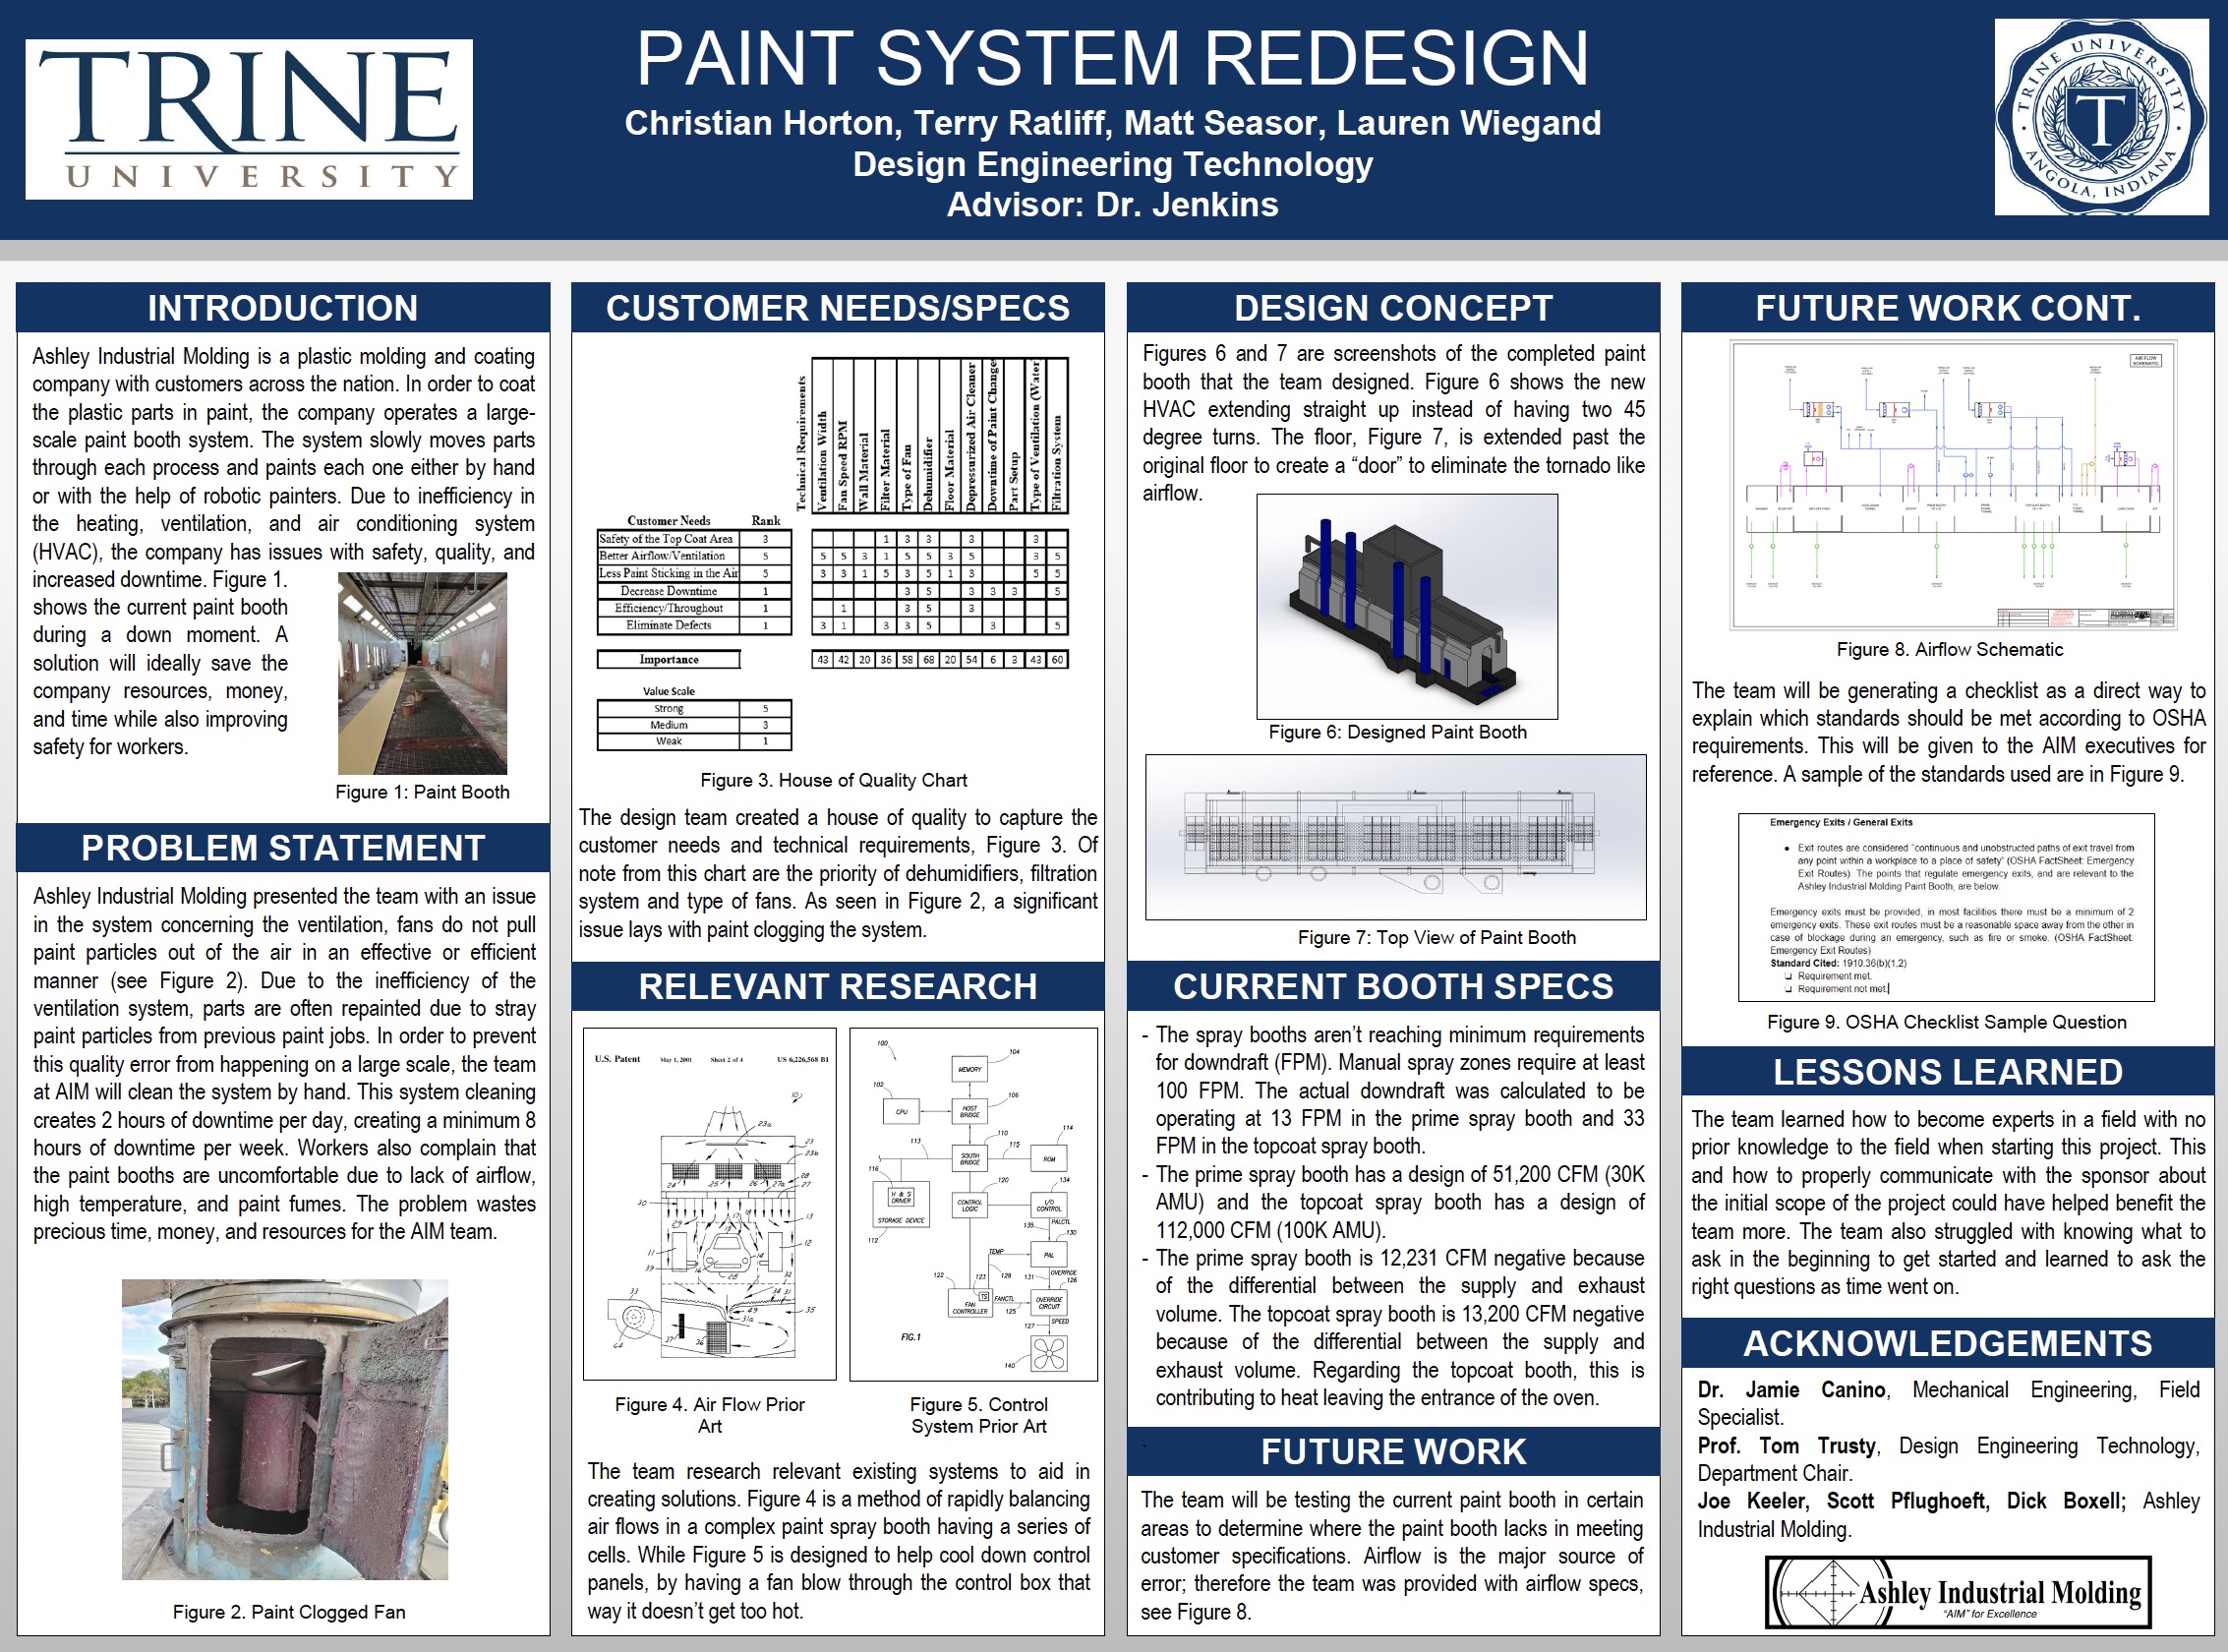 Paint system redesign Poster